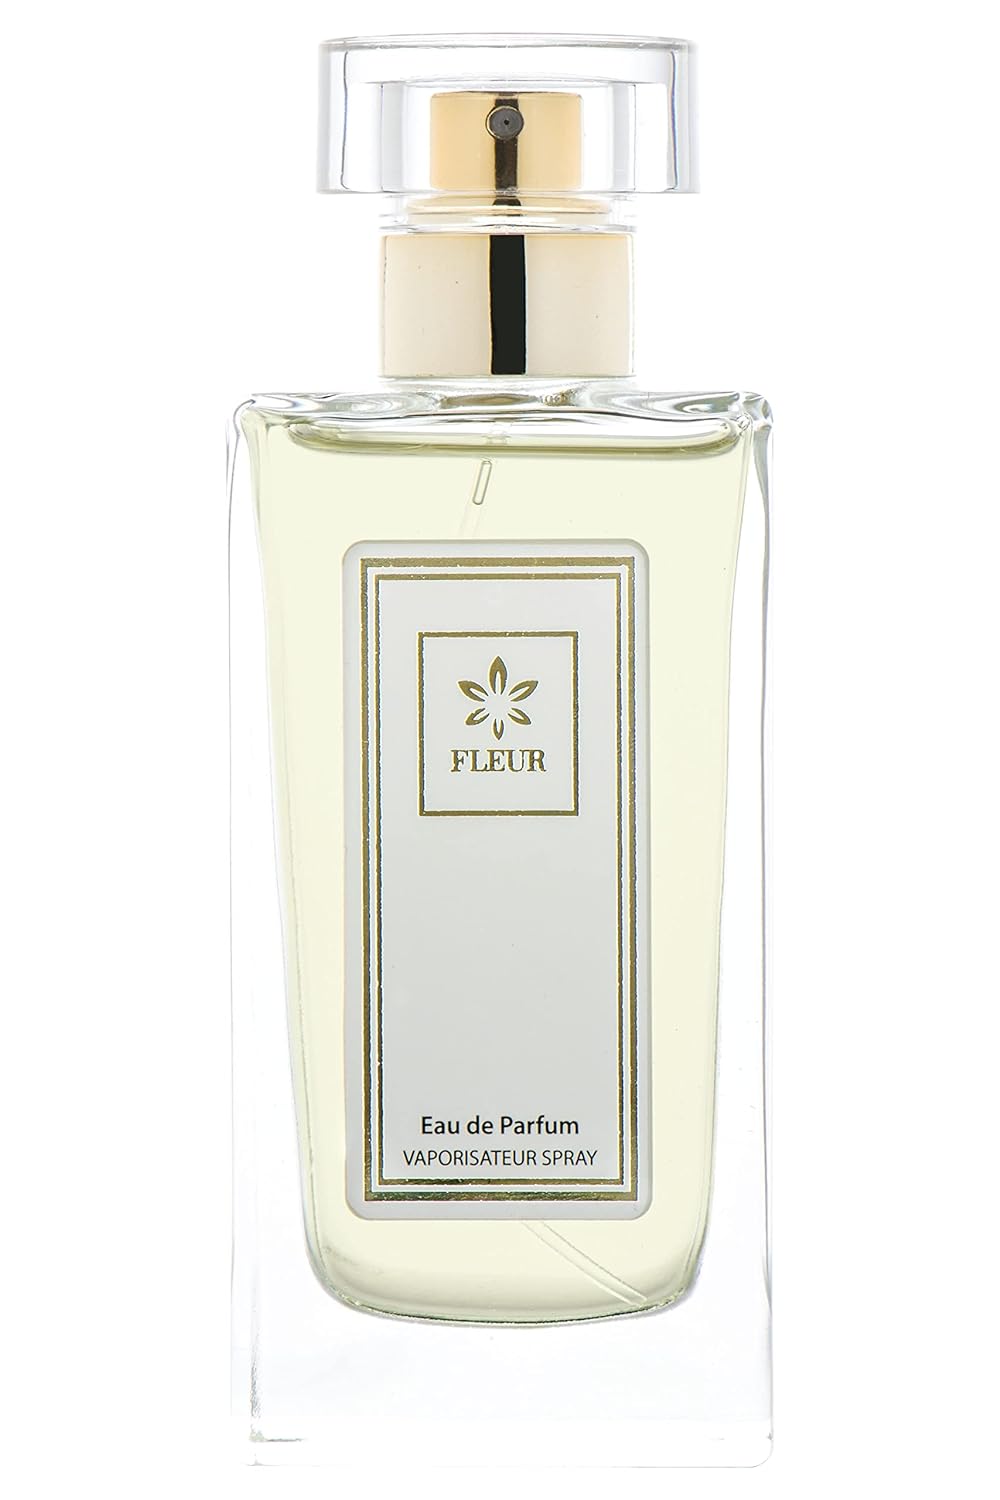 Fleur no 1177 Inspired by Girls Can Do Anything Perfume Dupes, Women \ 's fragrance twins, Edp fragrance spray 50 ml